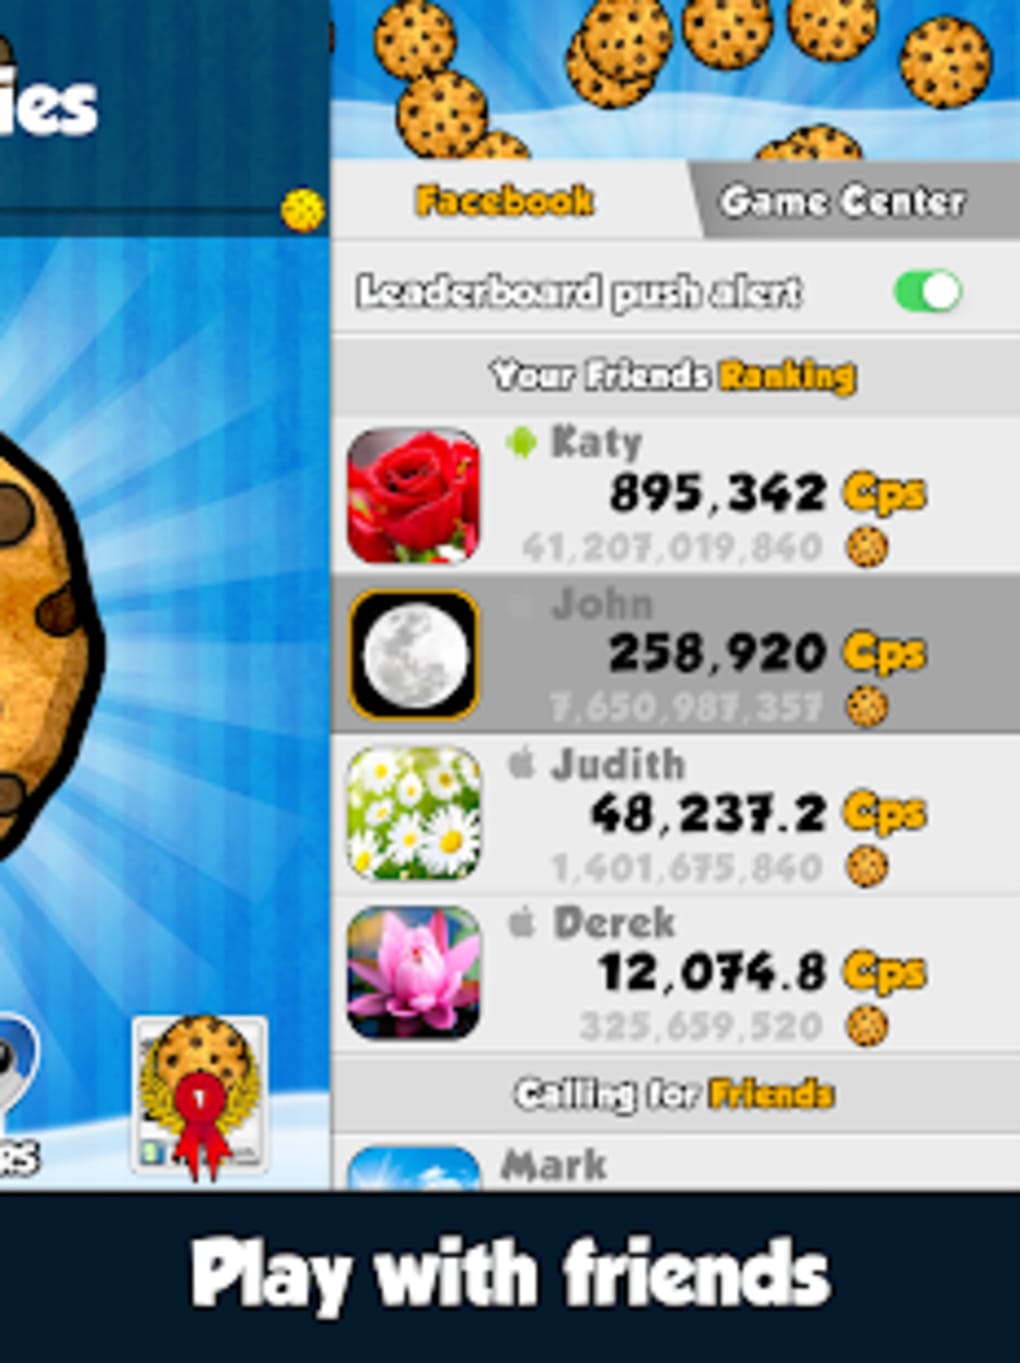 Cookie Clicker - APK Download for Android